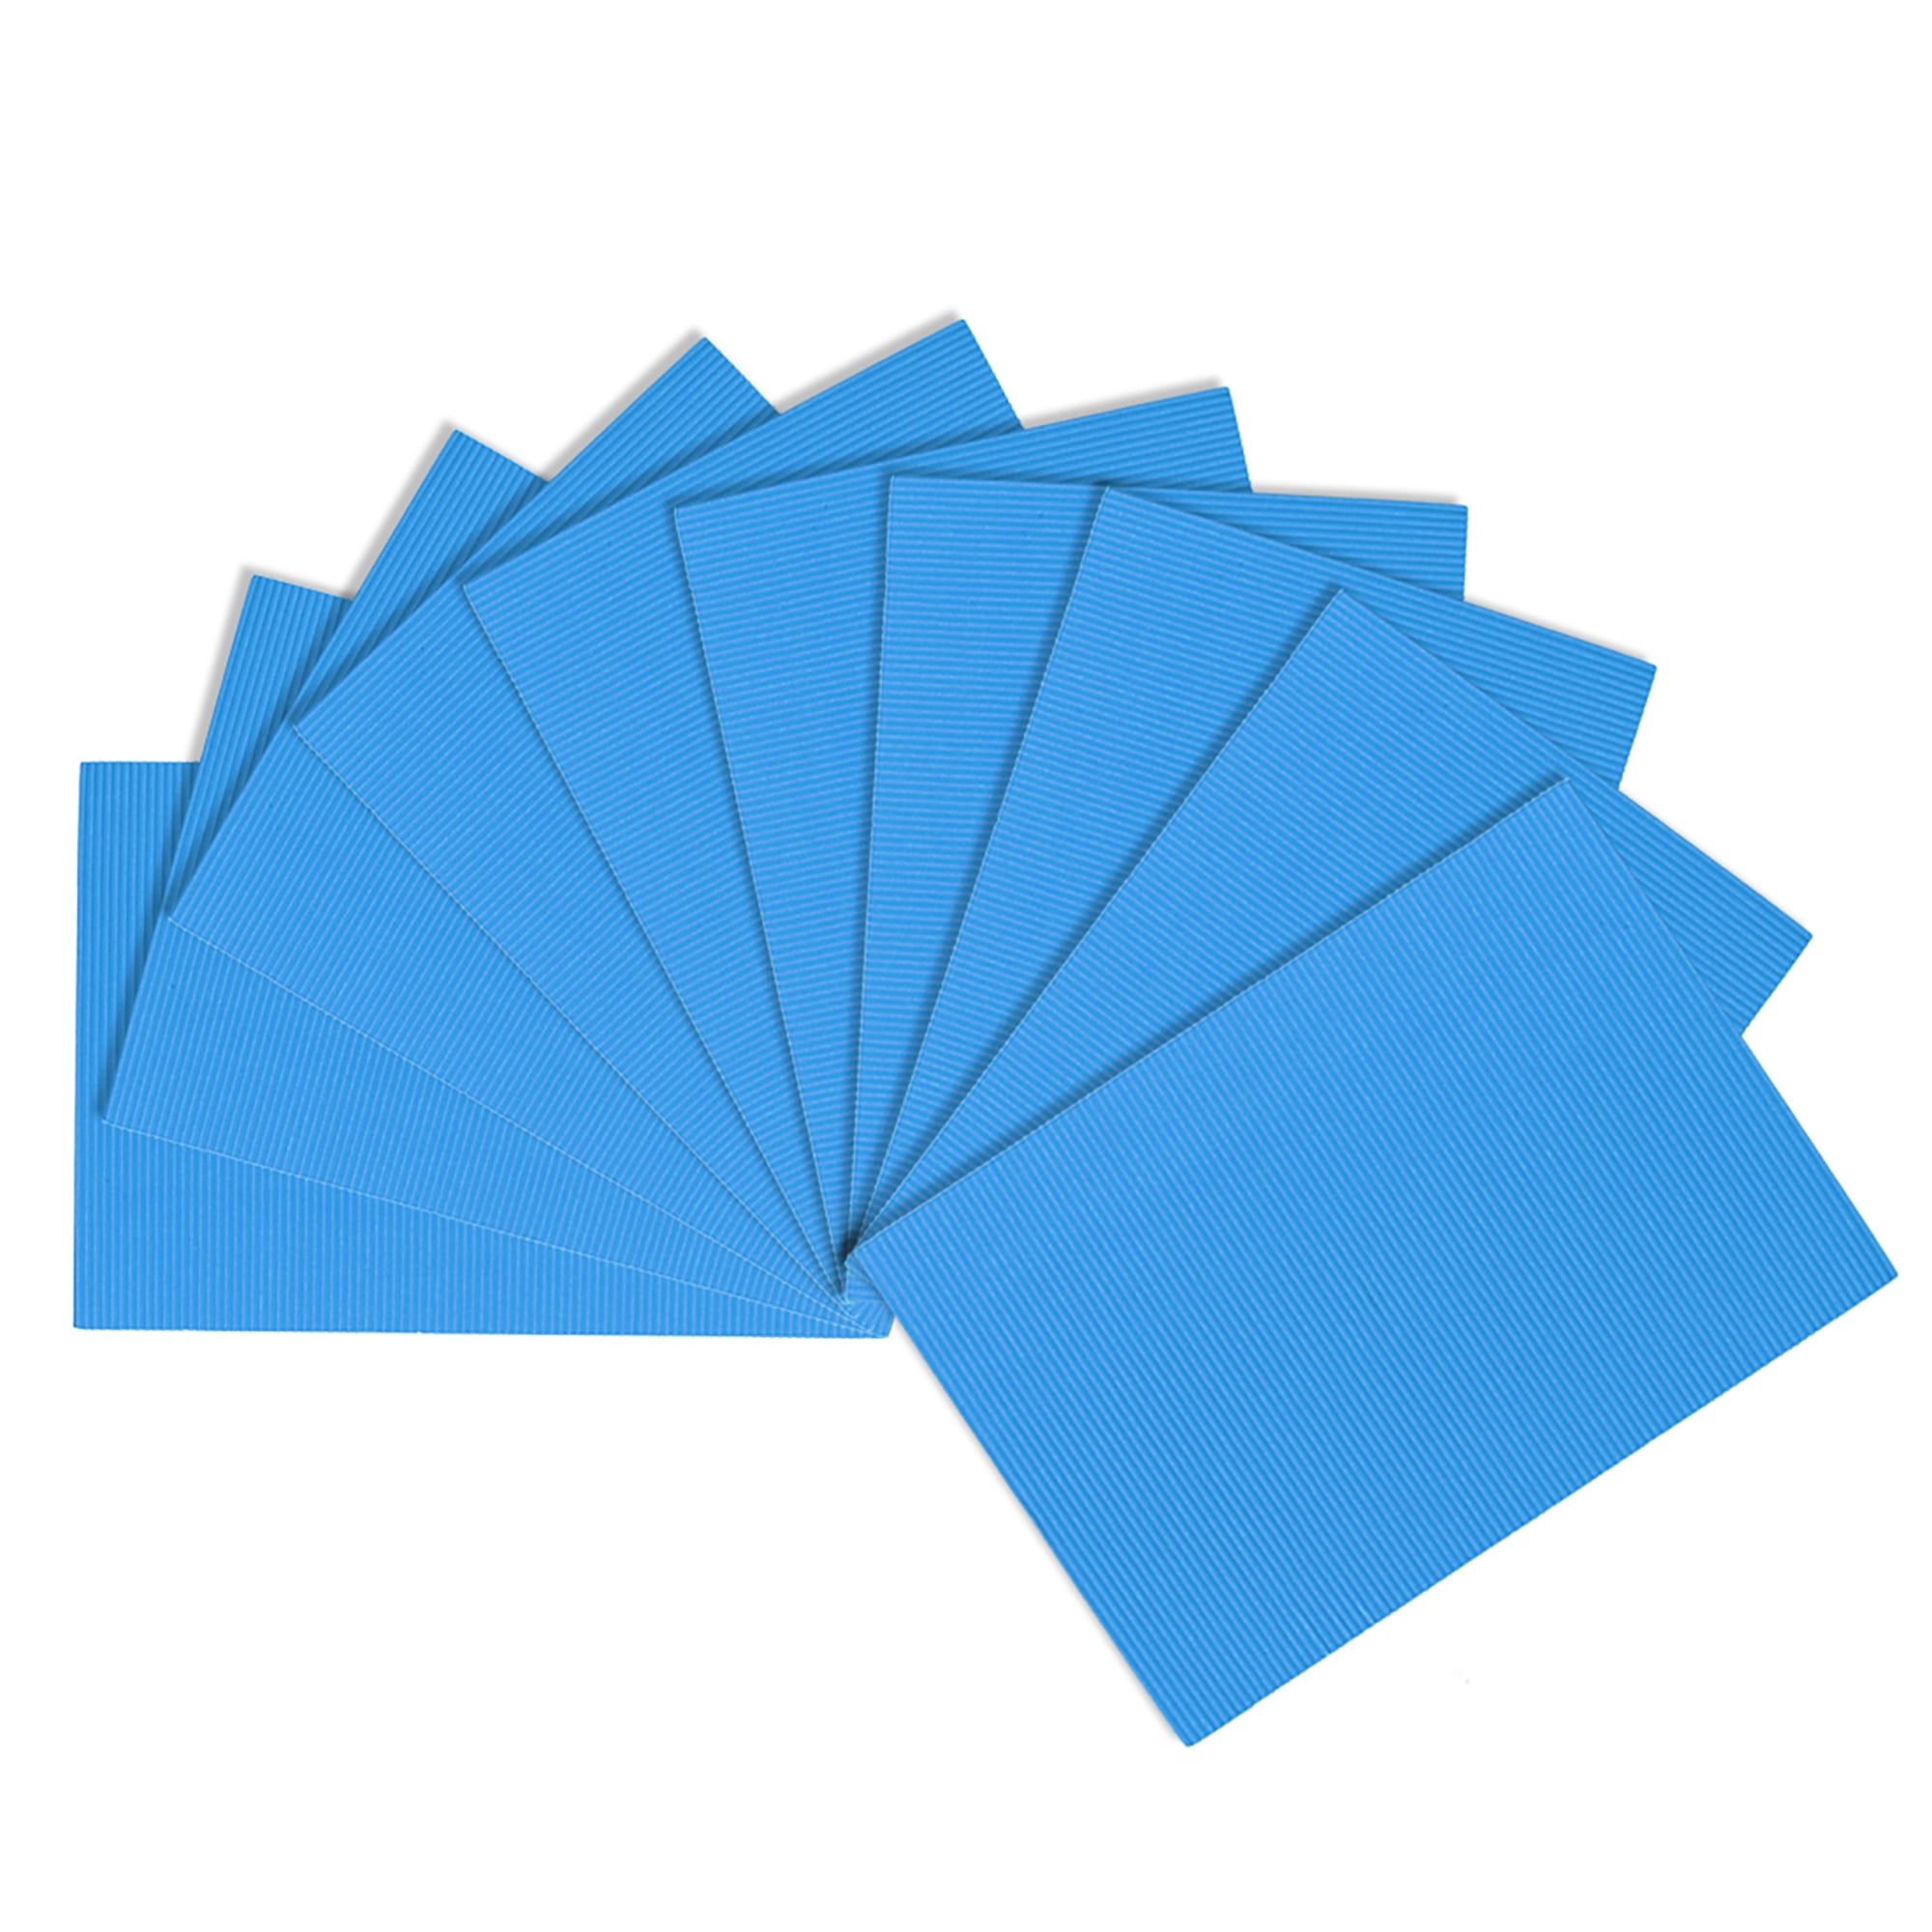 Corrugated Paper Sheets 25pcs 11.8-inch x 7.87-inch Light Blue Cardboard  for DIY Craft